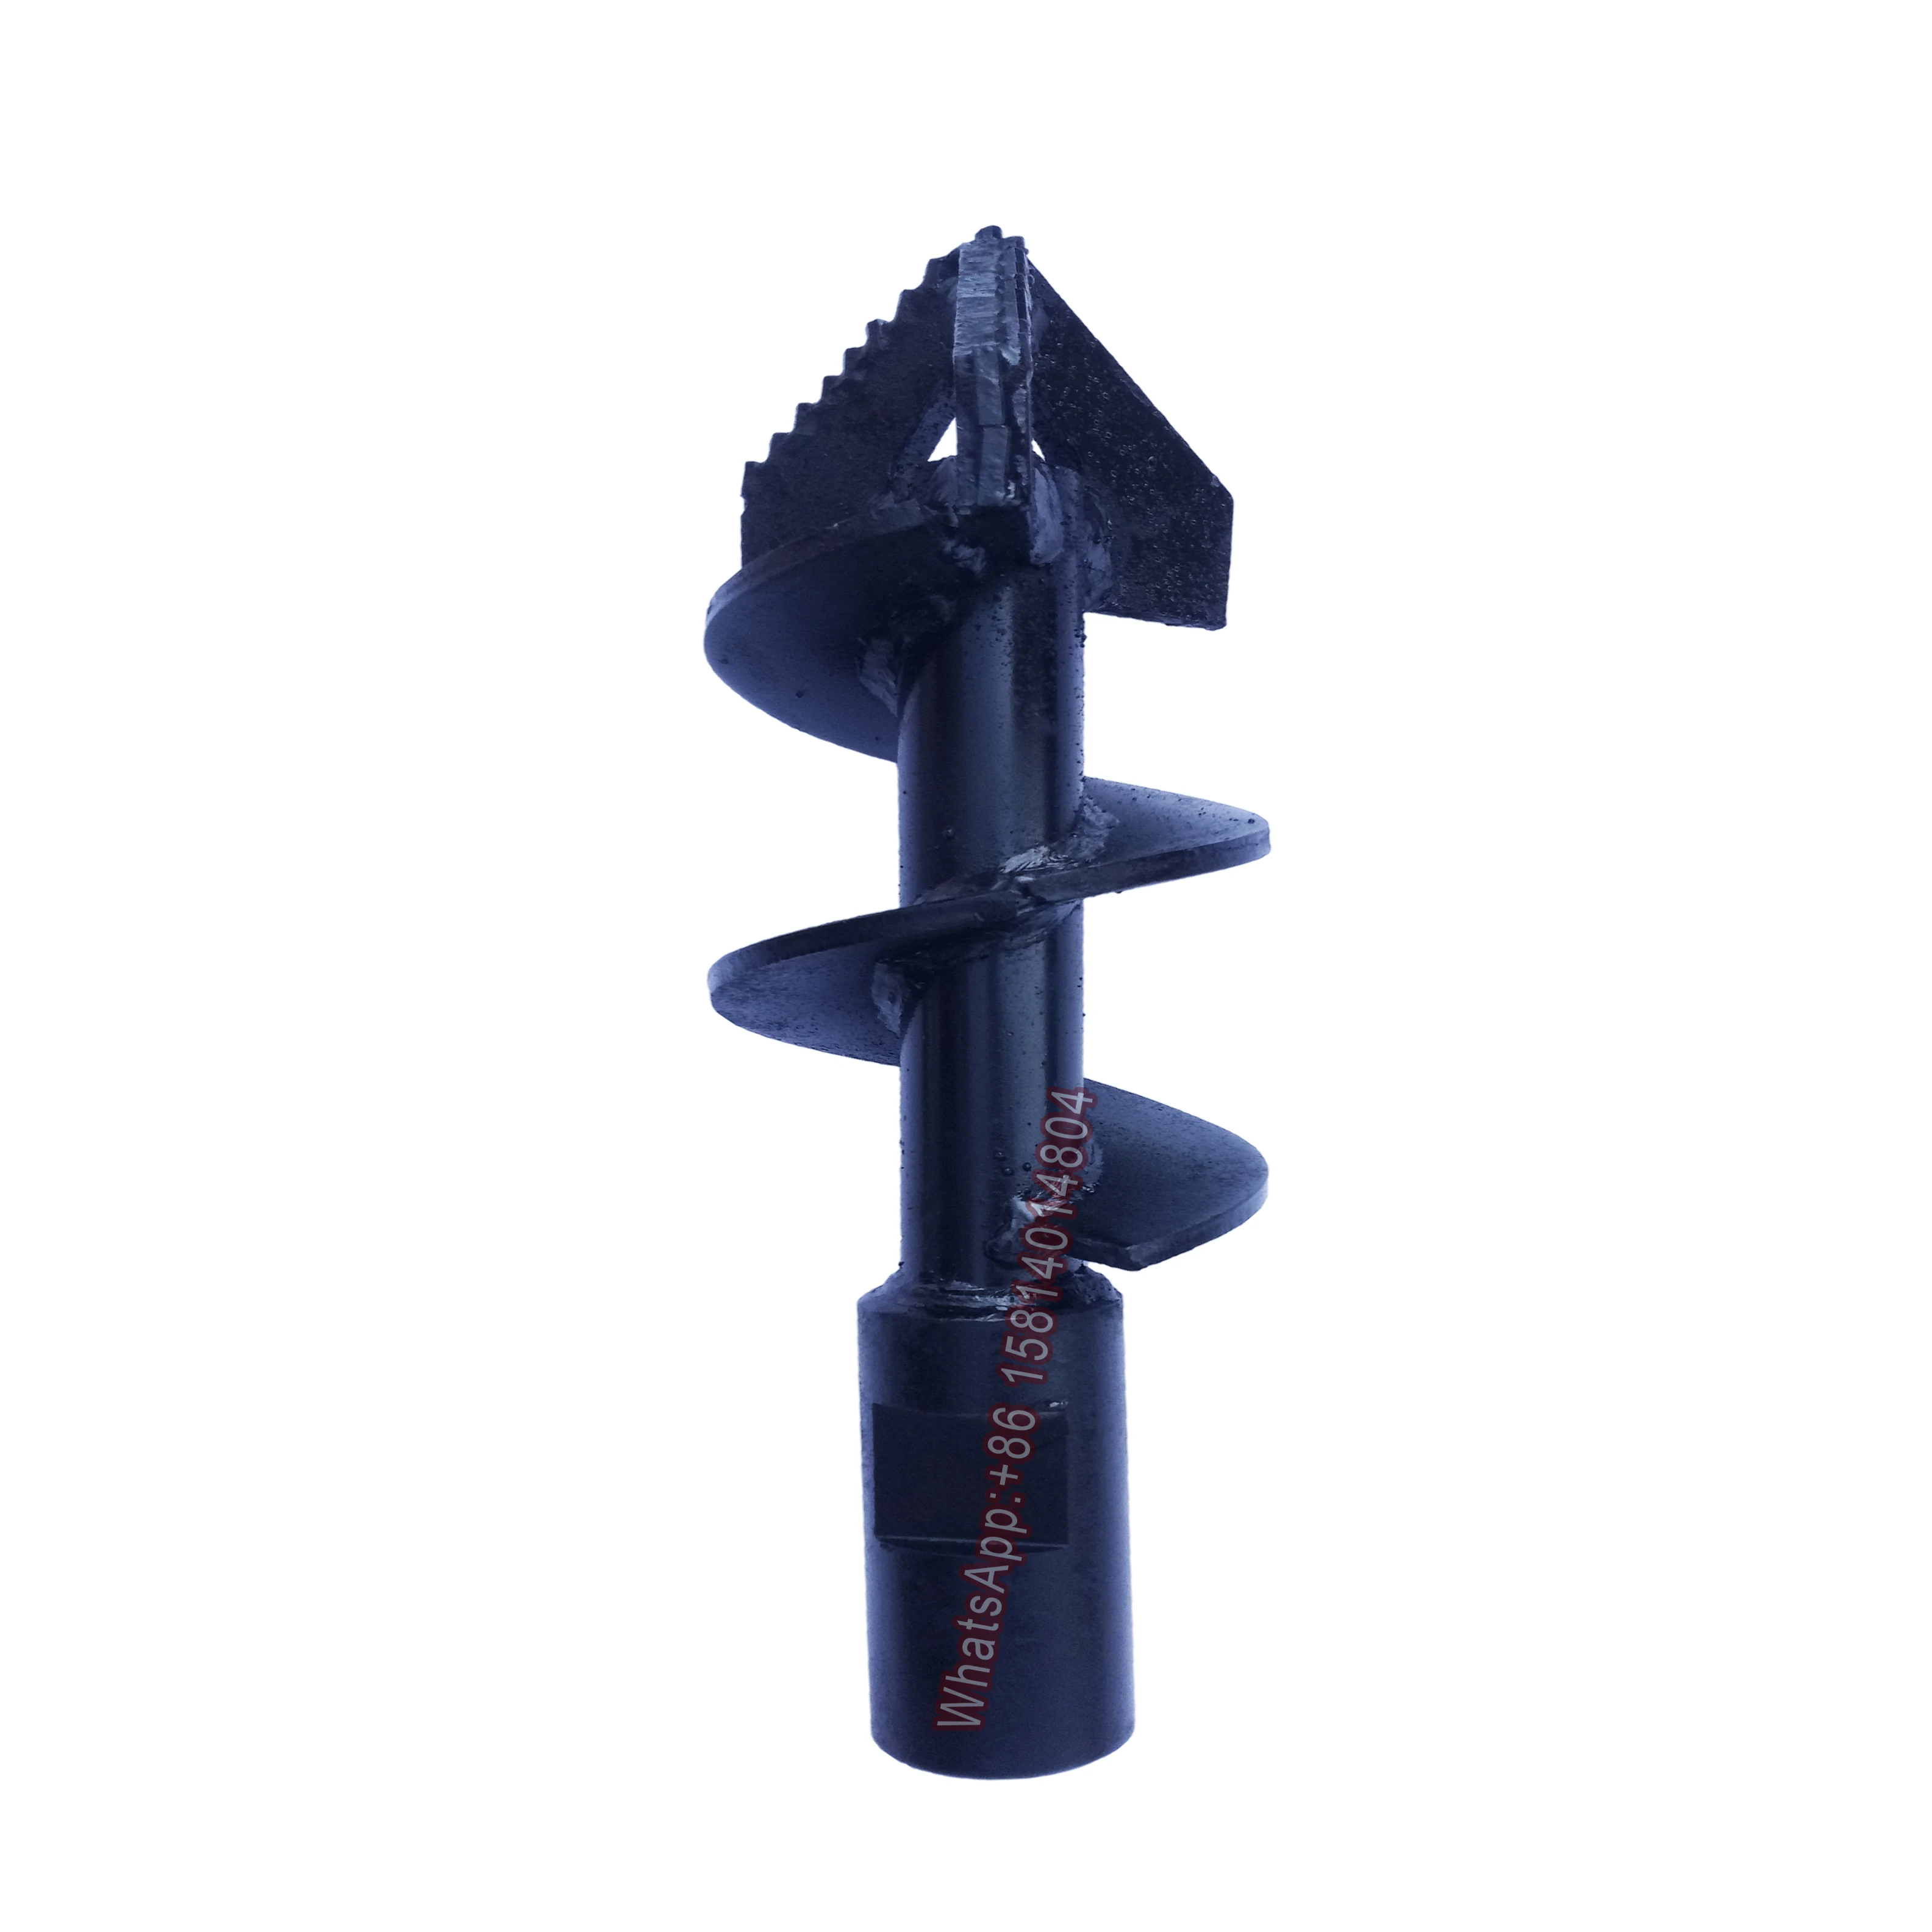 

3-wing twist drills,Open-hole twist drills,alloy drills, drilling rig accessories for geological exploration